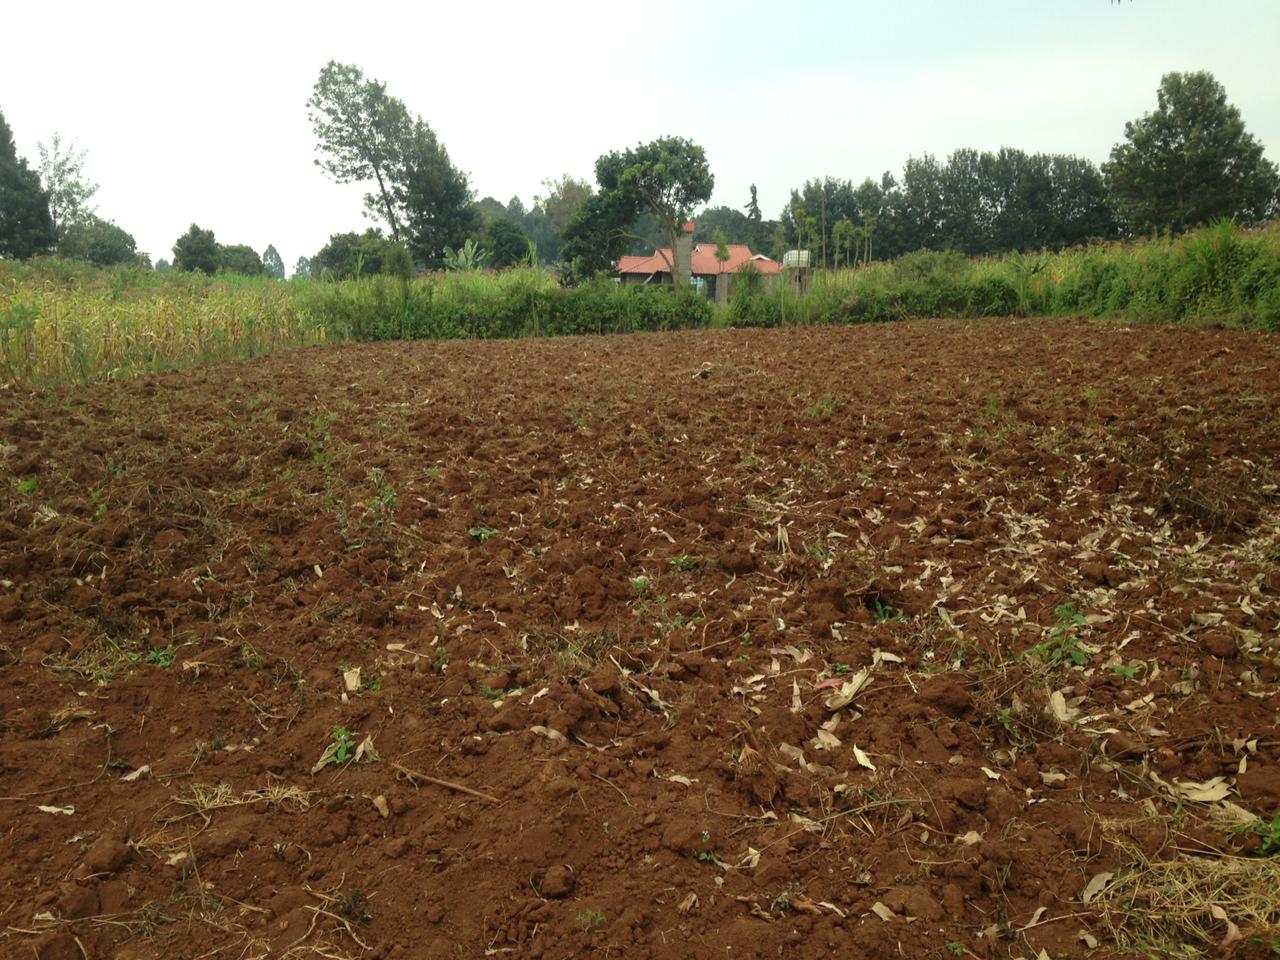 135 ft by 112 ft Plot for sale in Thigio Limuru. Distress sale